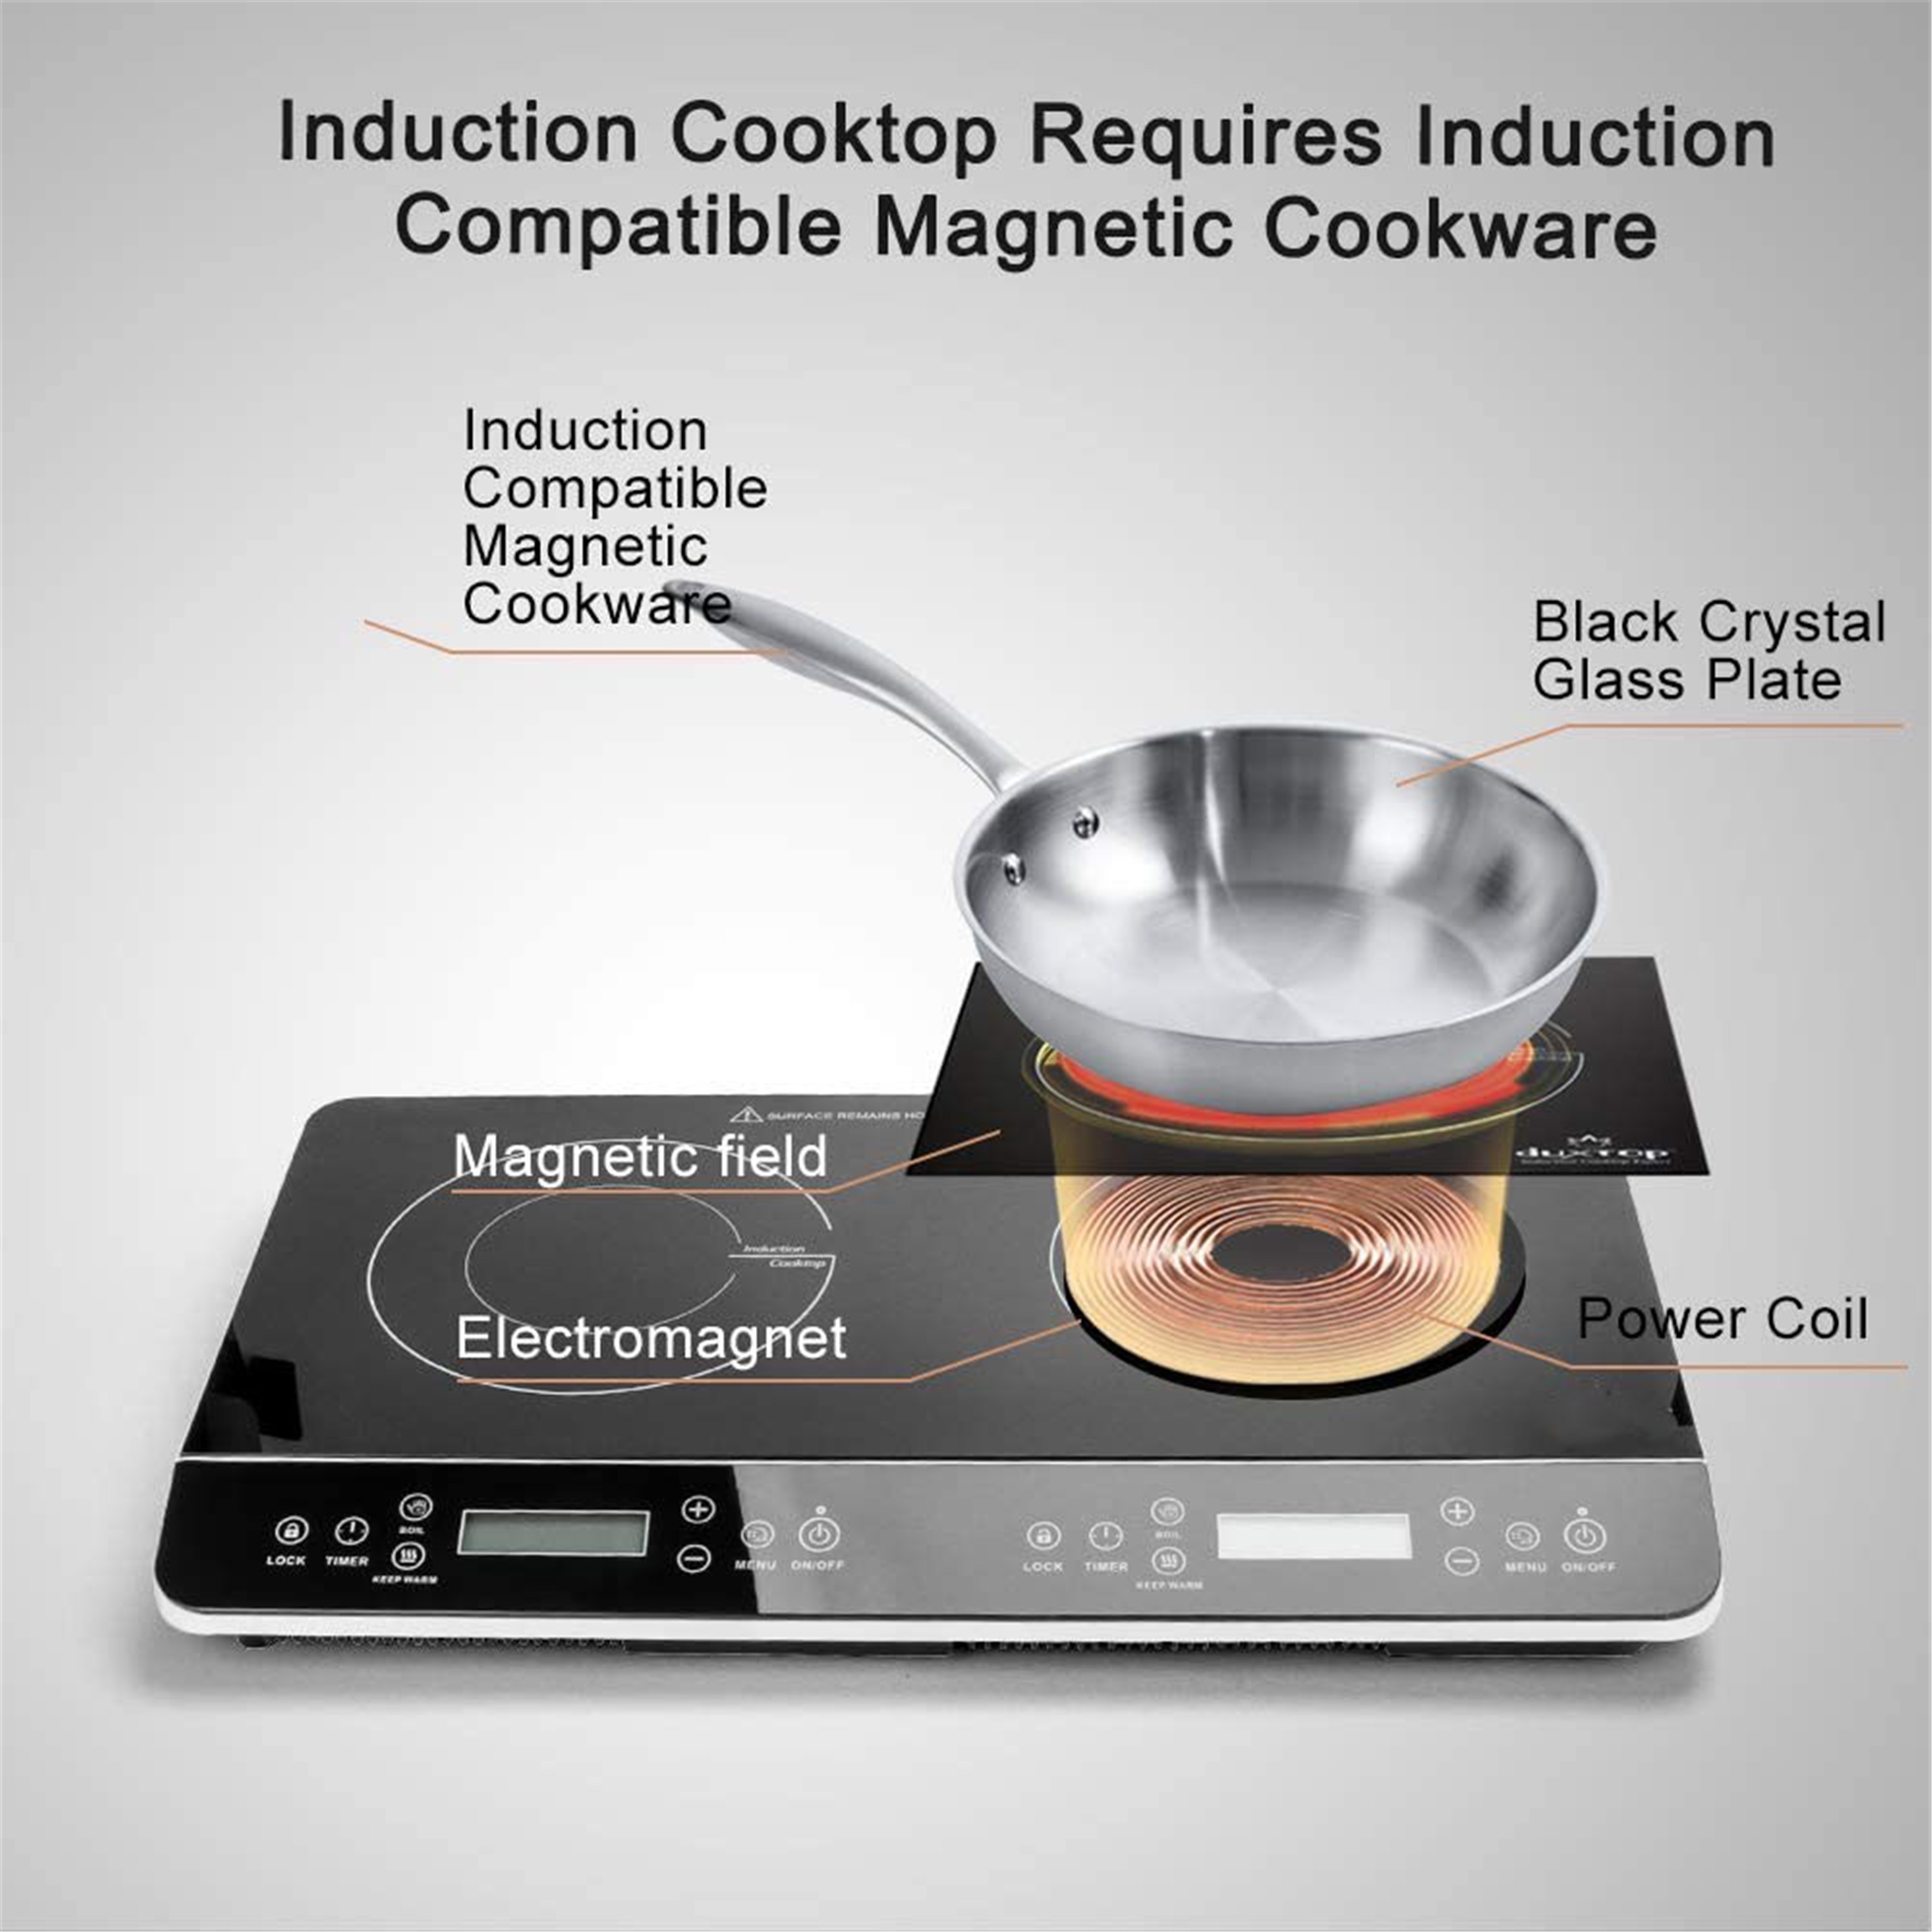 Duxtop Portable Induction Cooktop, Countertop Burner Induction Hot Plate  with LCD Sensor Touch 1800 Watts & Ceramic Non-stick Frying Pan, Stainless